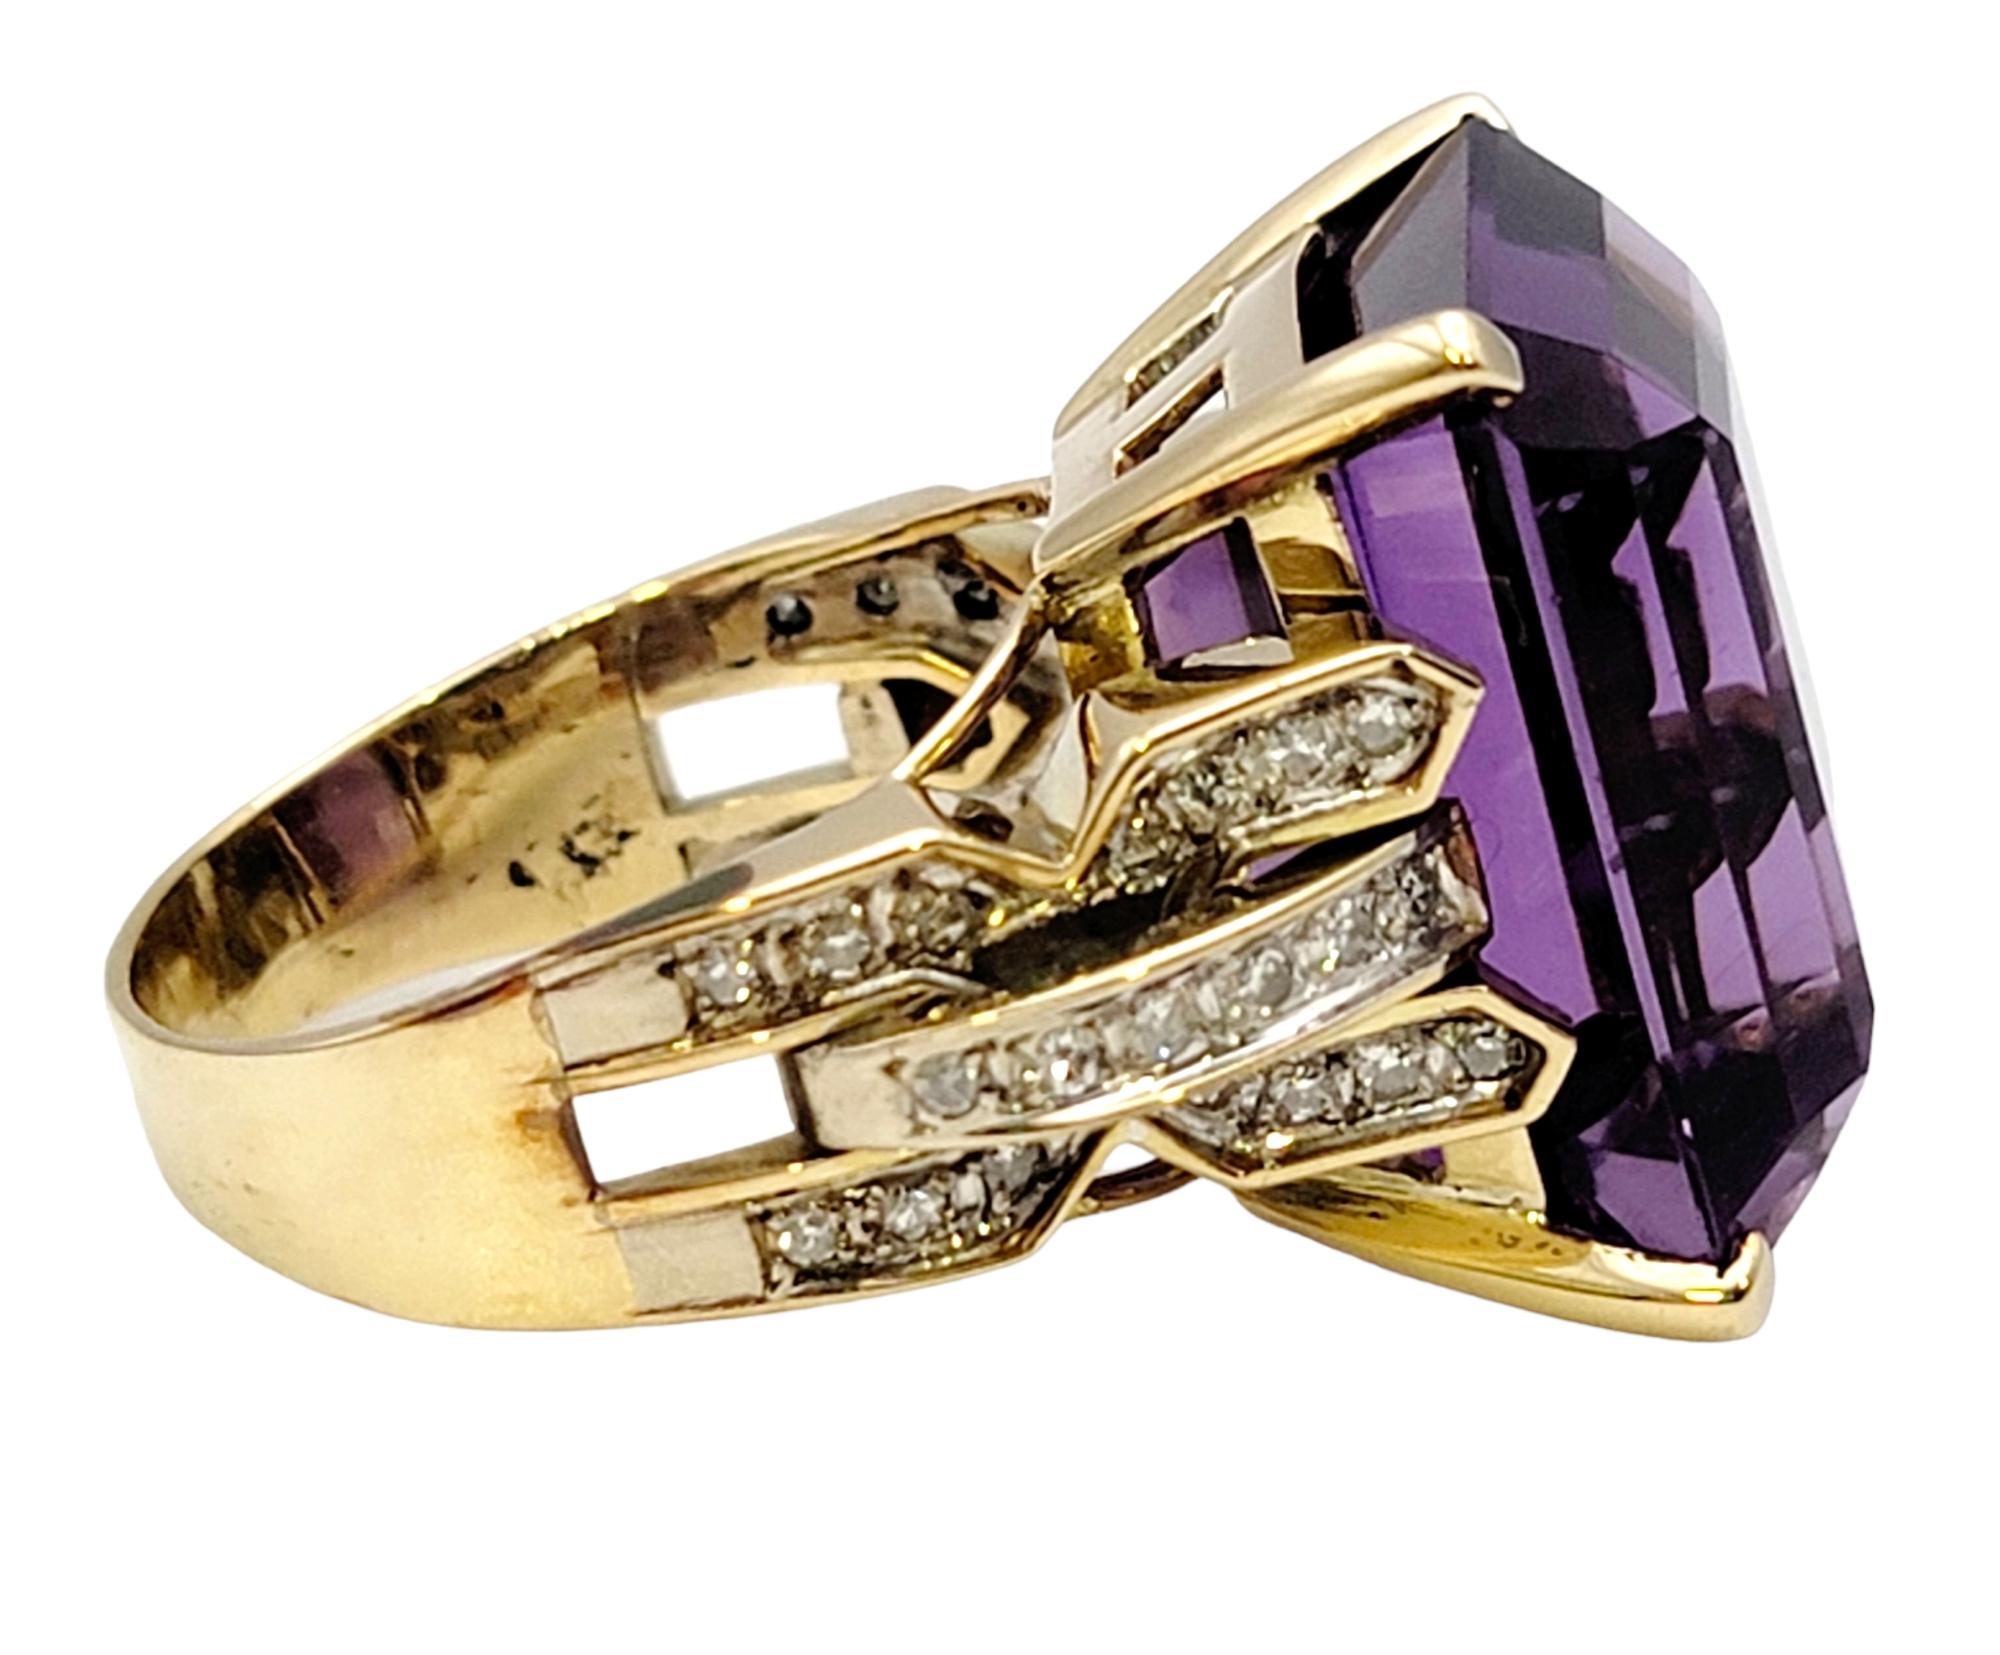 Huge 34.85 Carat Emerald Cut Amethyst Cocktail Ring with Side Diamond Detailing In Good Condition For Sale In Scottsdale, AZ